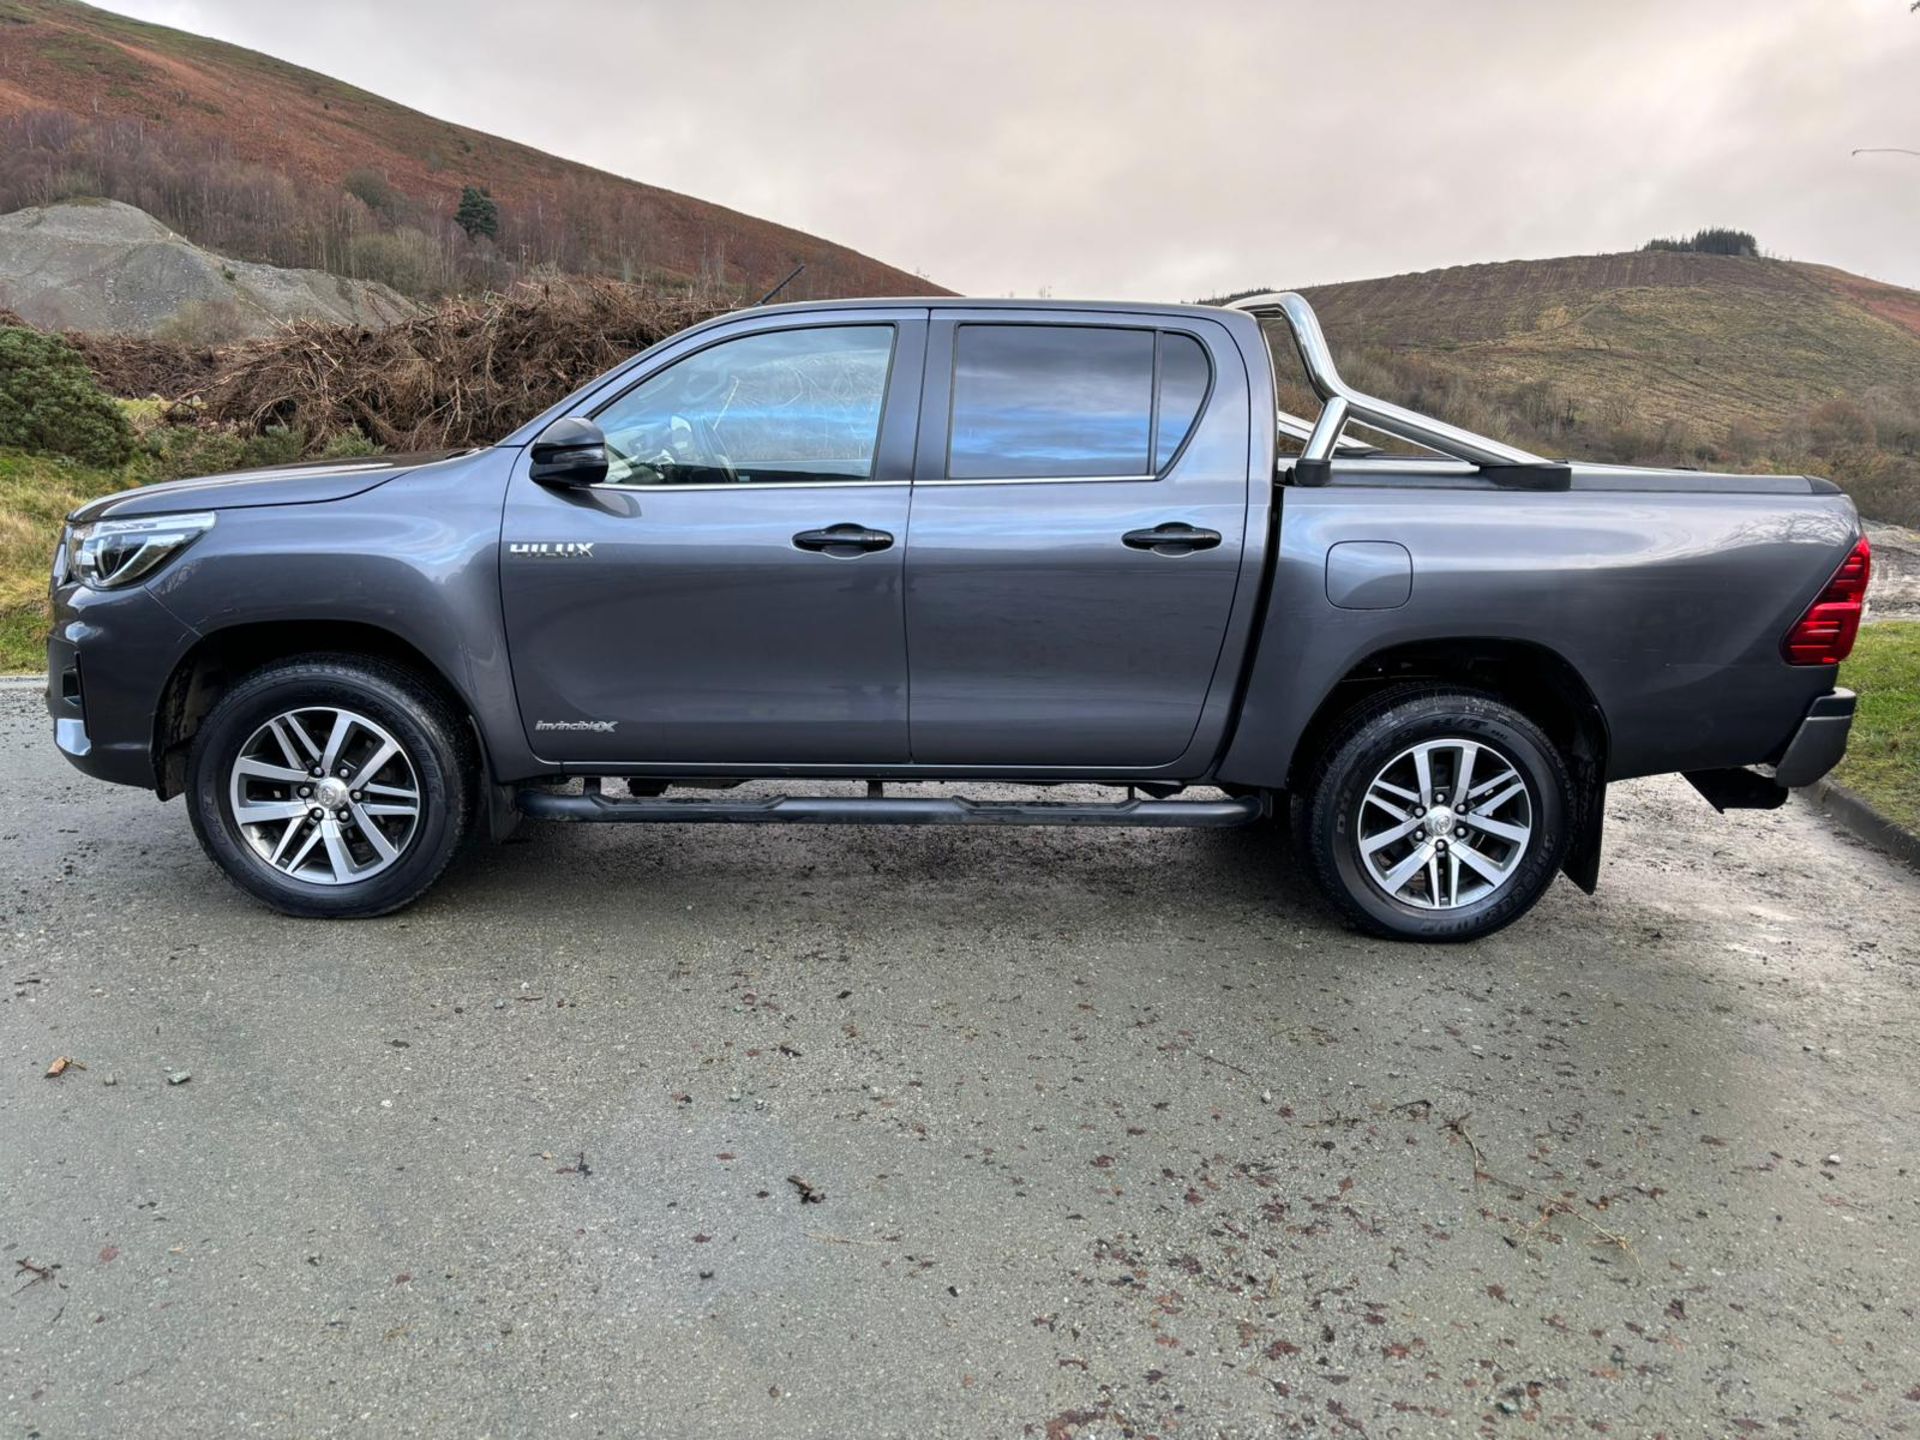 TOYOTA HILUX INVINCIBLE X DOUBLE CAB PICKUP TRUCK 4X4 AUTOMATIC 64K 4WD TWIN CAB - Image 5 of 13